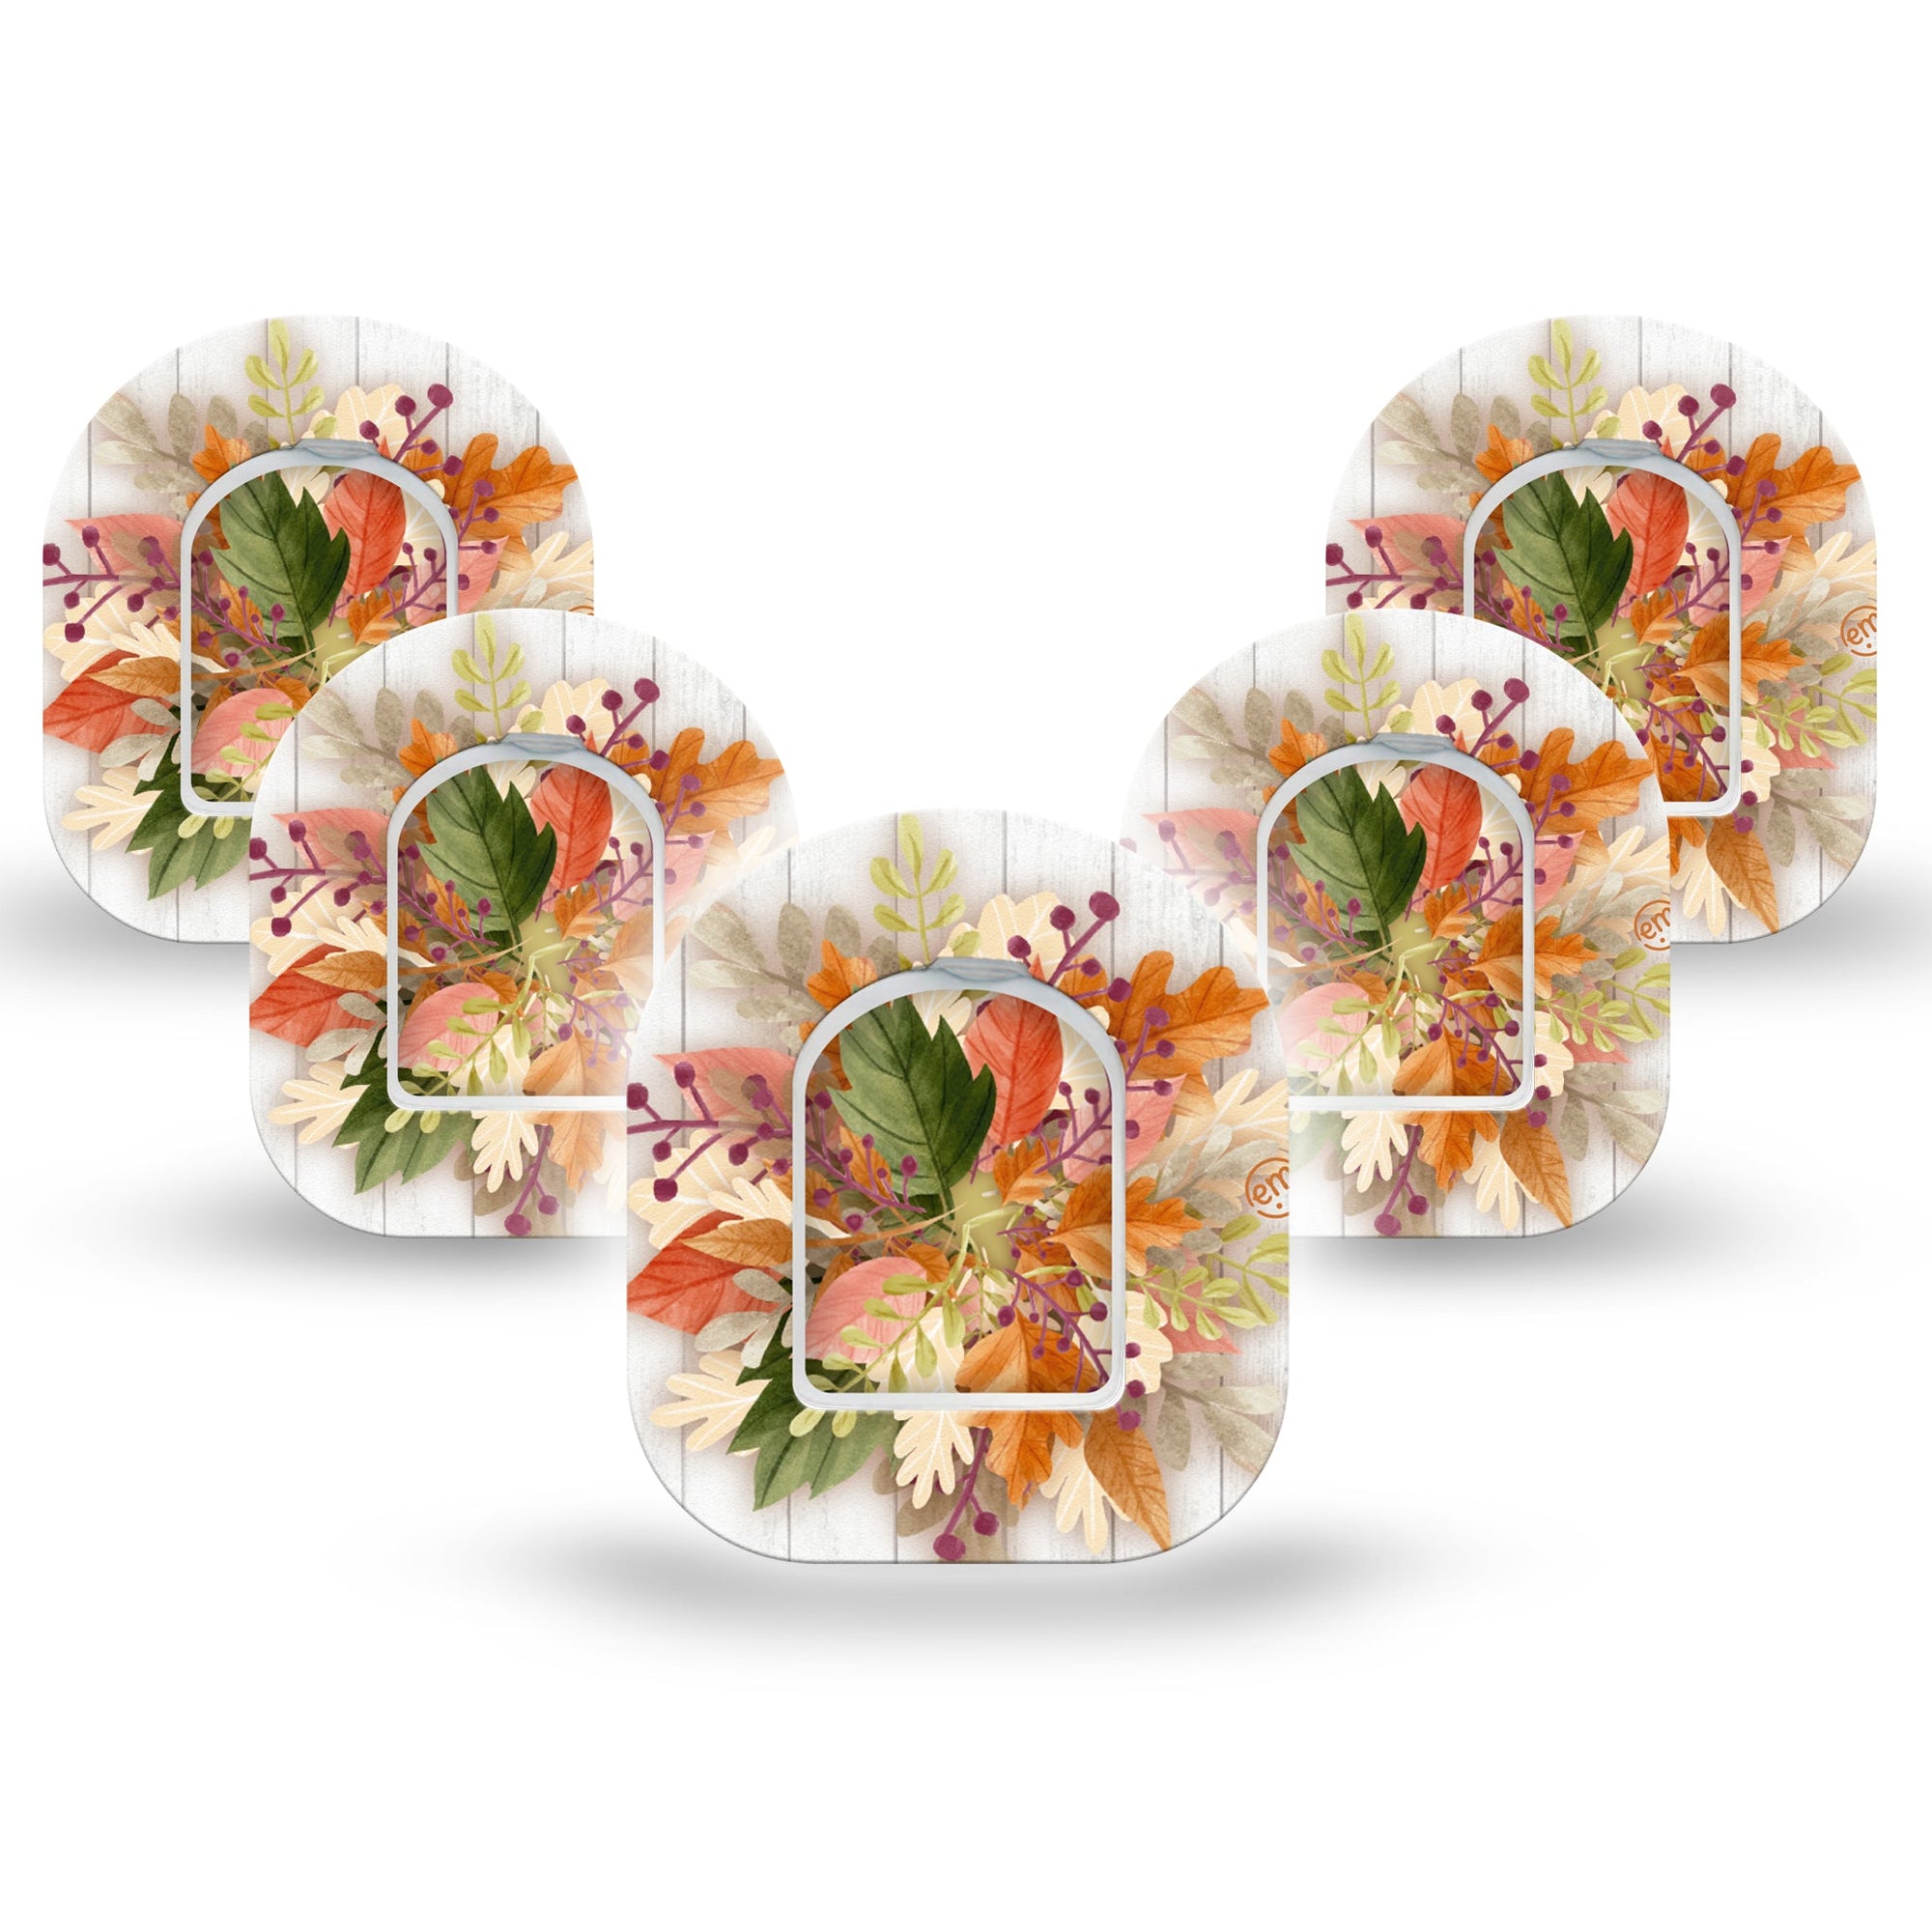 ExpressionMed Autumn Leaves Pod Mini Tape 5 Stickers and 5 Tapes, Golden Leaves Fixing Ring Patch Pump Design